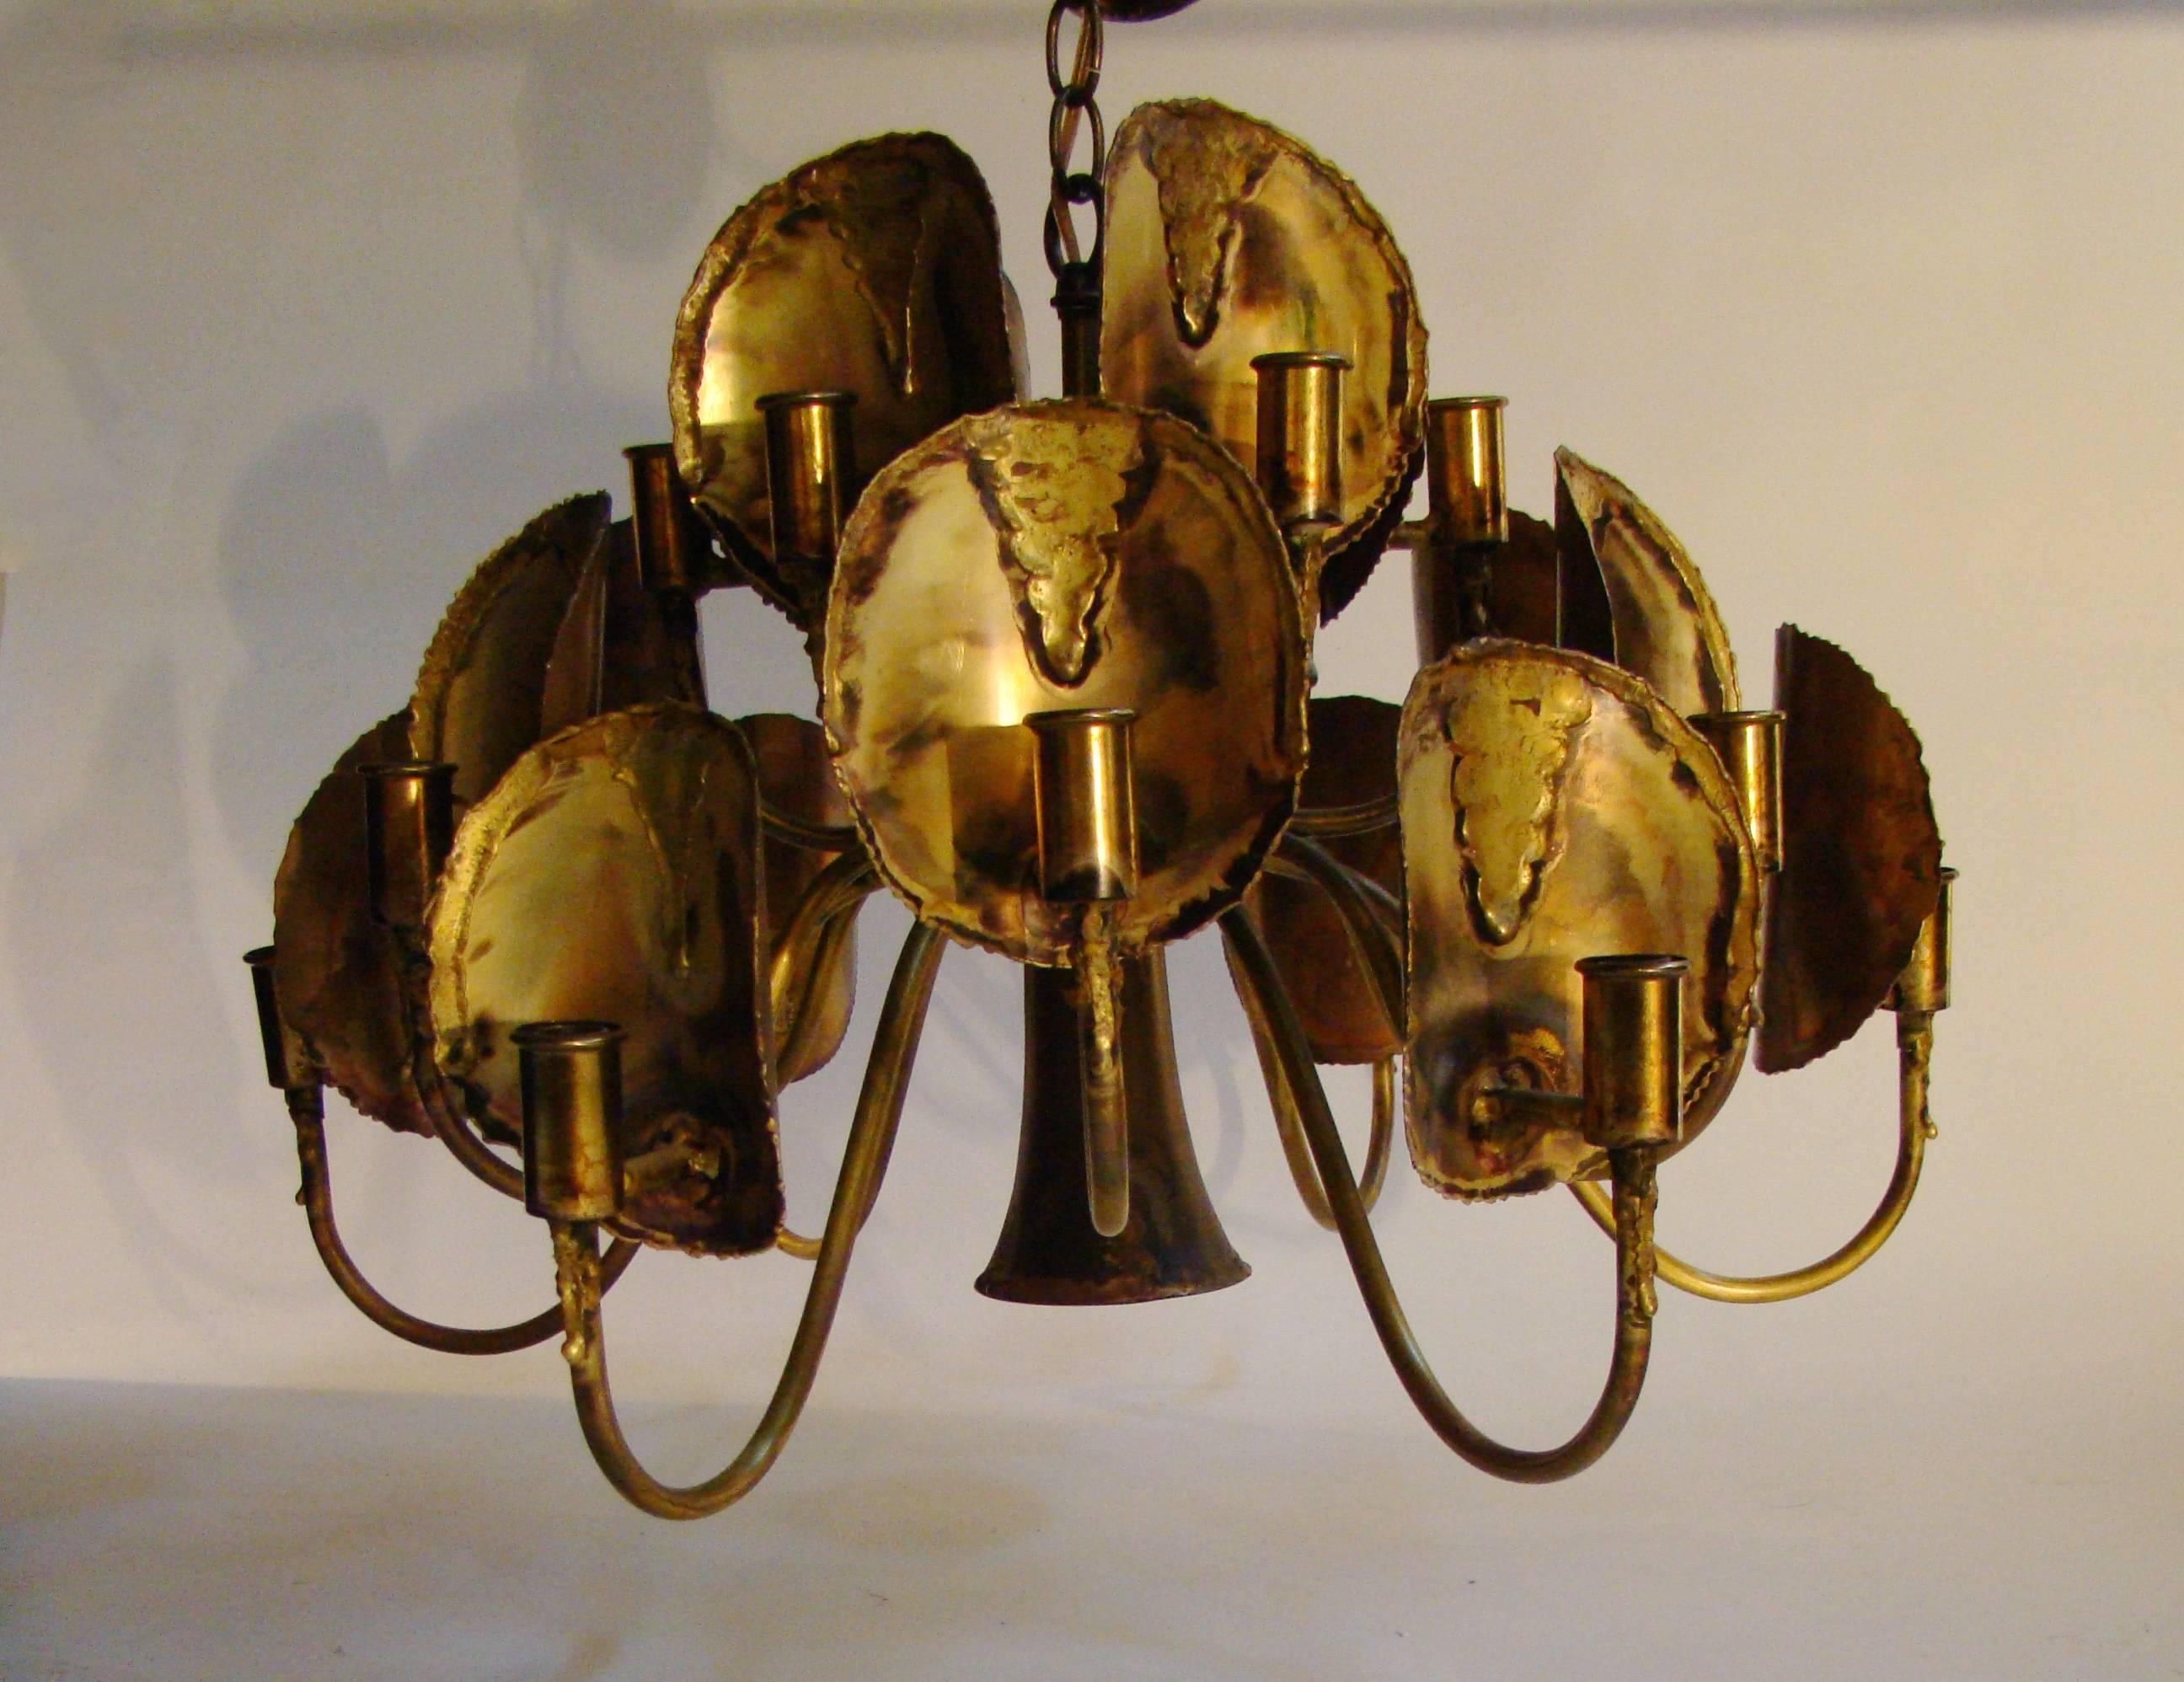 Exquisite mixed metals brutalist chandelier by Tom Green for the Feldman Co. C. 1970s.  Has 18 sockets for bulbs and 1 down light.